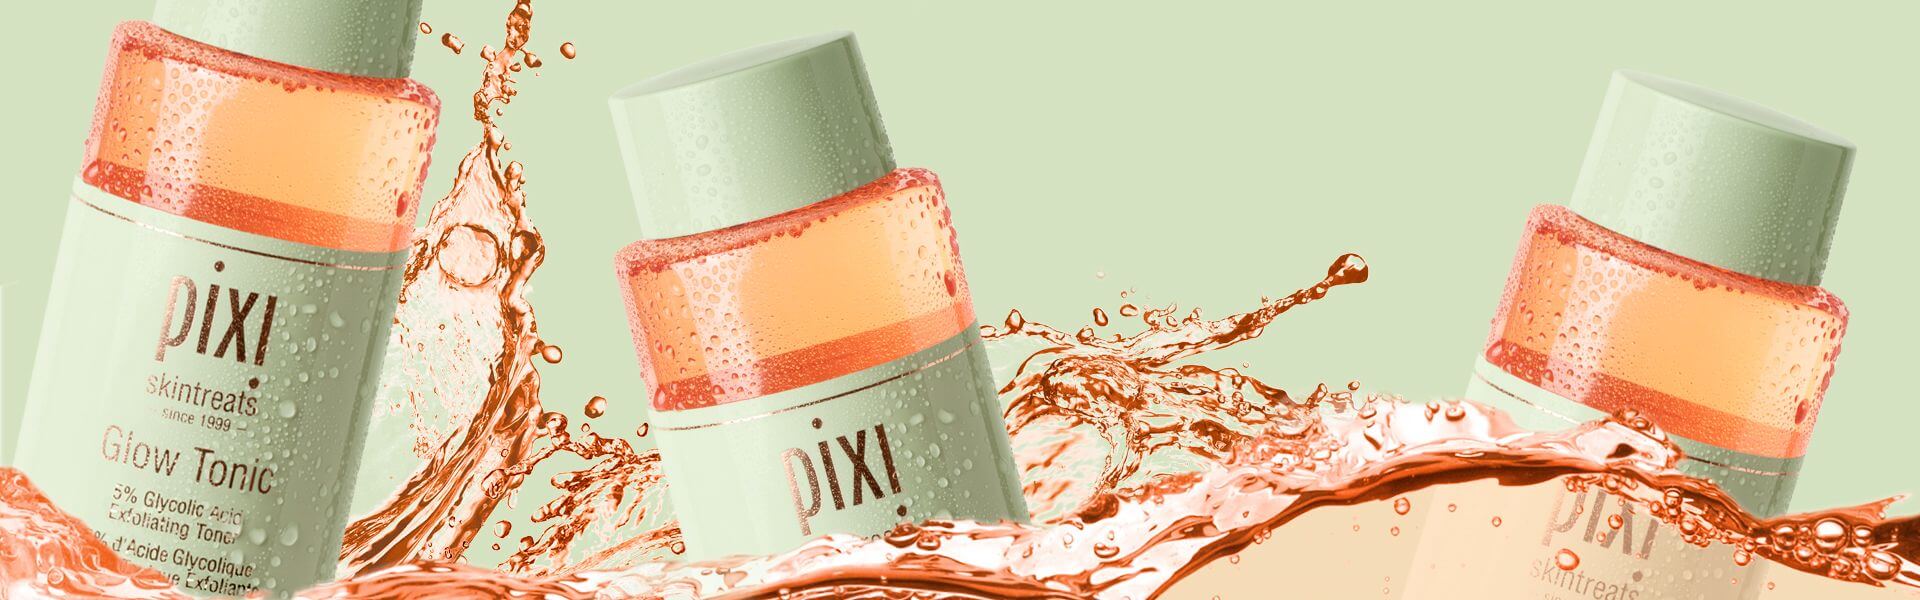 pixi beauty products banner